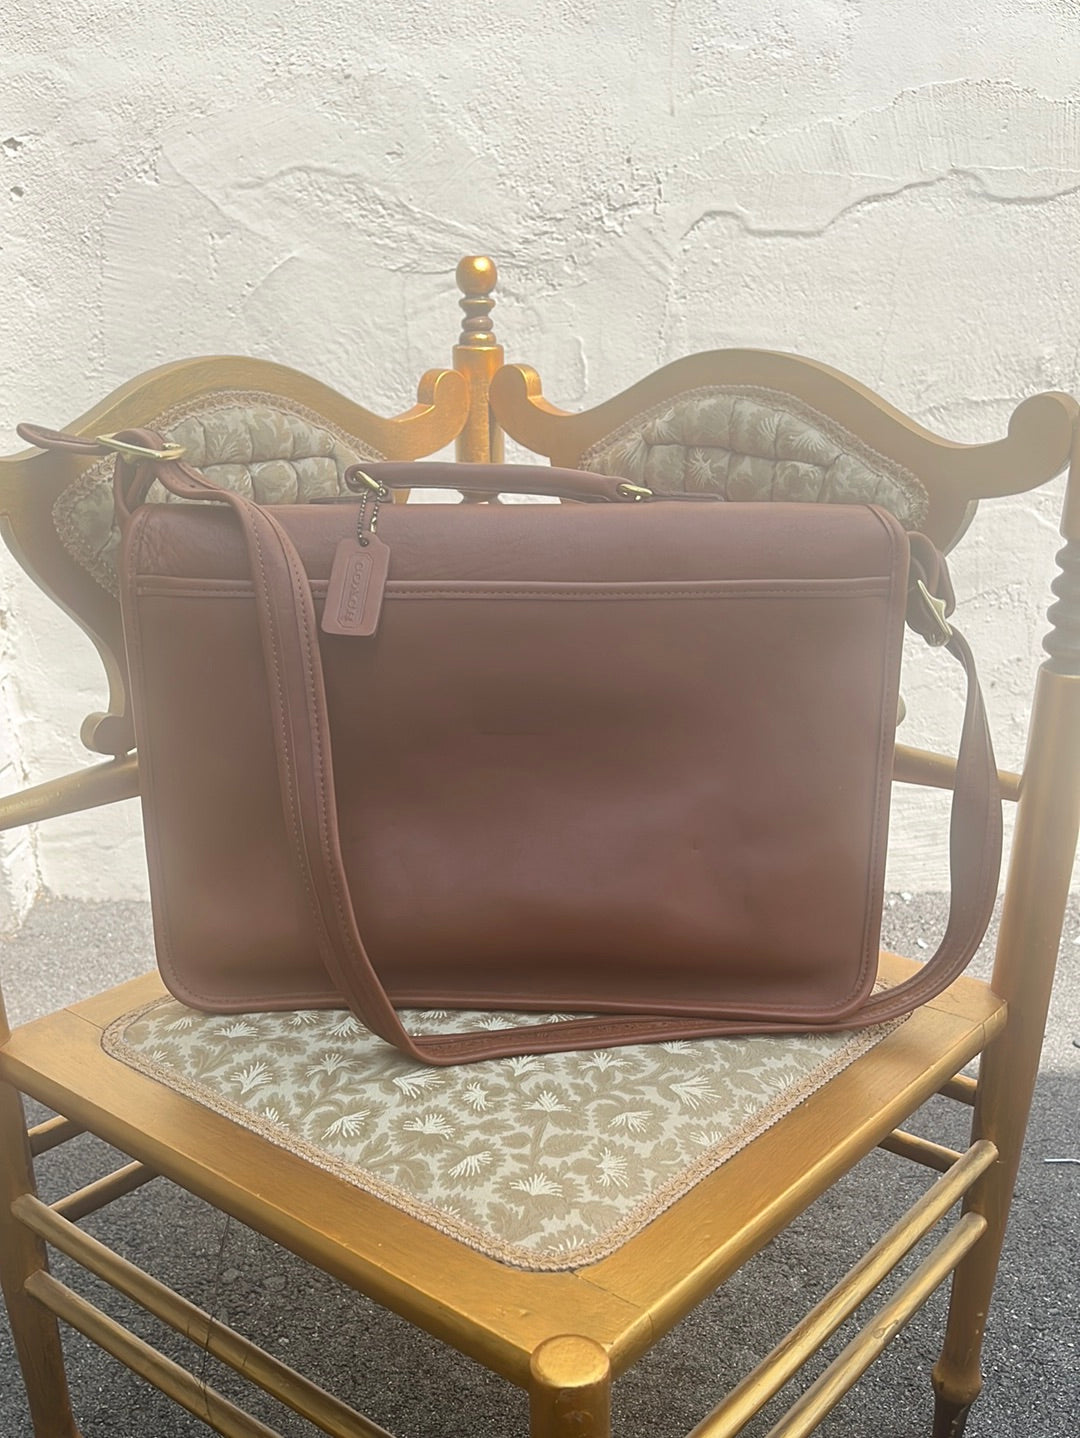 Leather Side Bag - Buy Leather Shoulder Bag From Online Store in